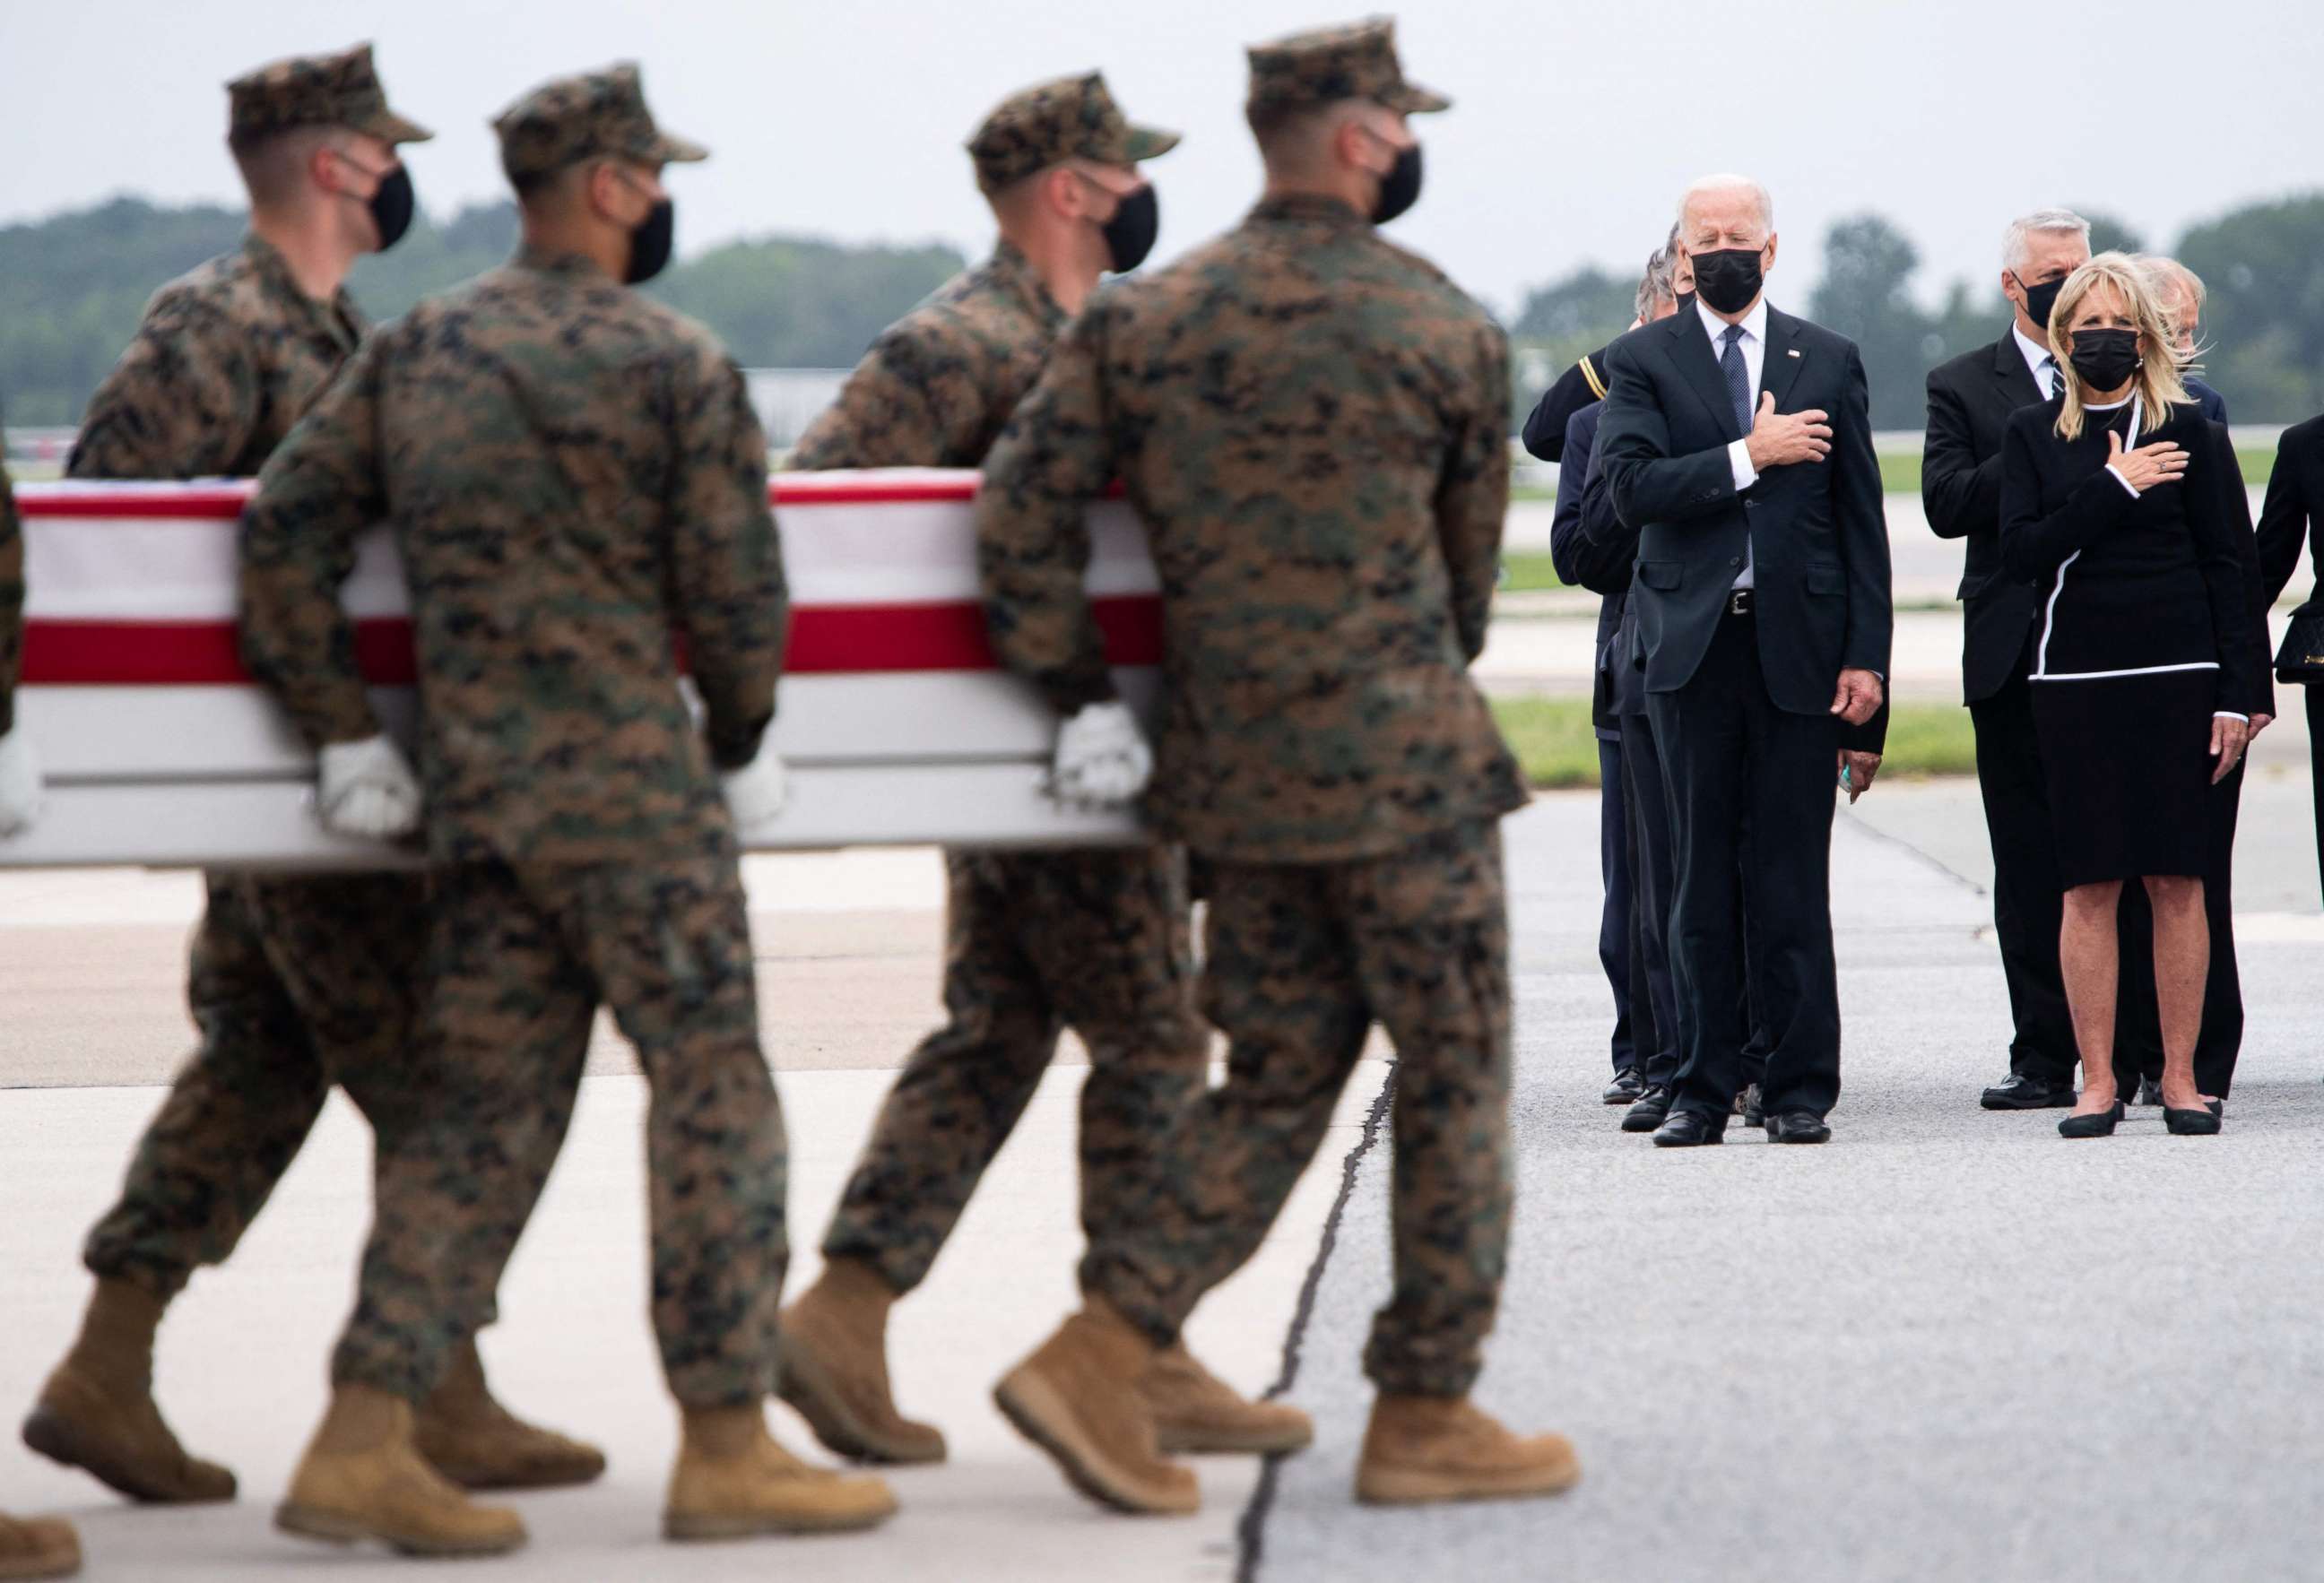 PHOTO: President Joe Biden, center, attends the dignified transfer of the remains of a fallen service members at Dover Air Force Base, Aug. 29, 2021, in Dover, Delaware.